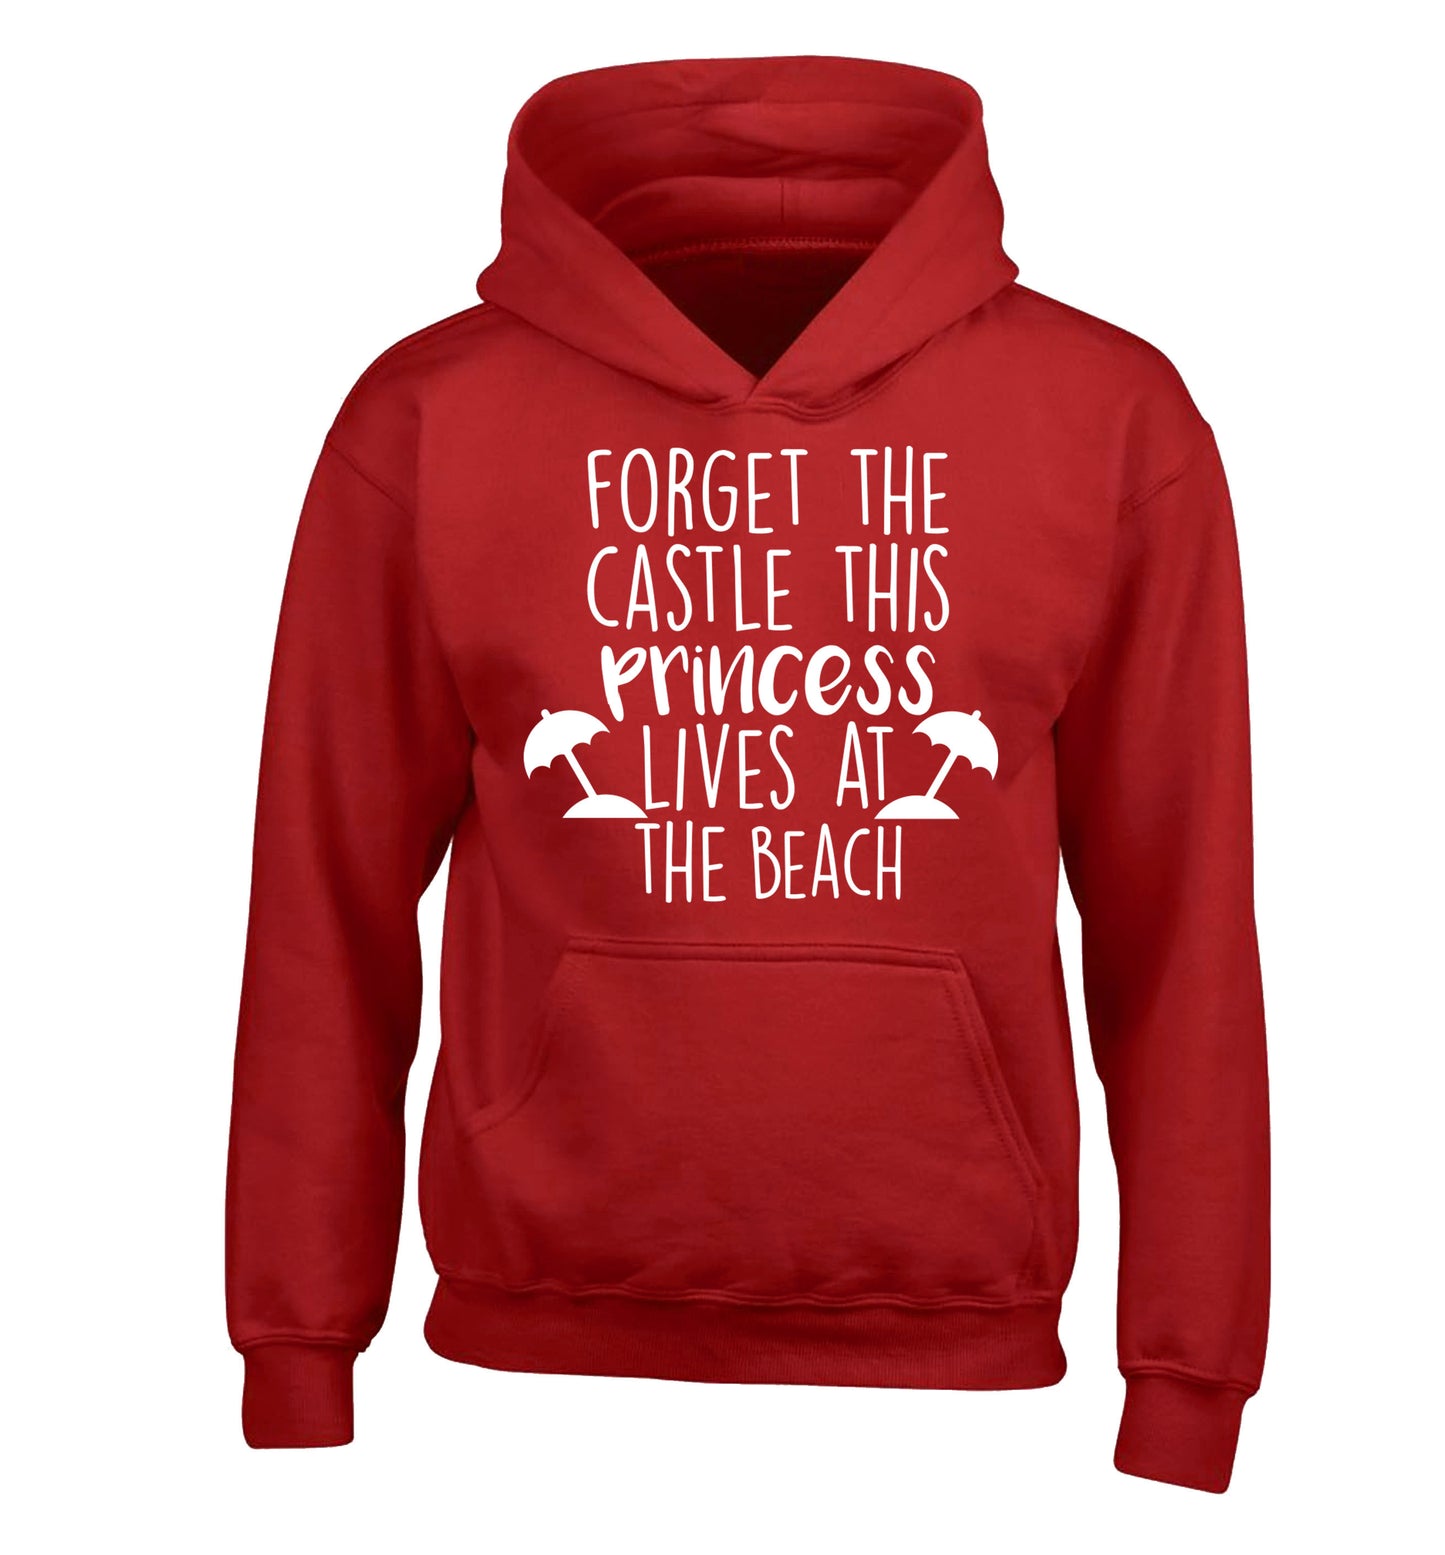 Forget the castle this princess lives at the beach children's red hoodie 12-14 Years